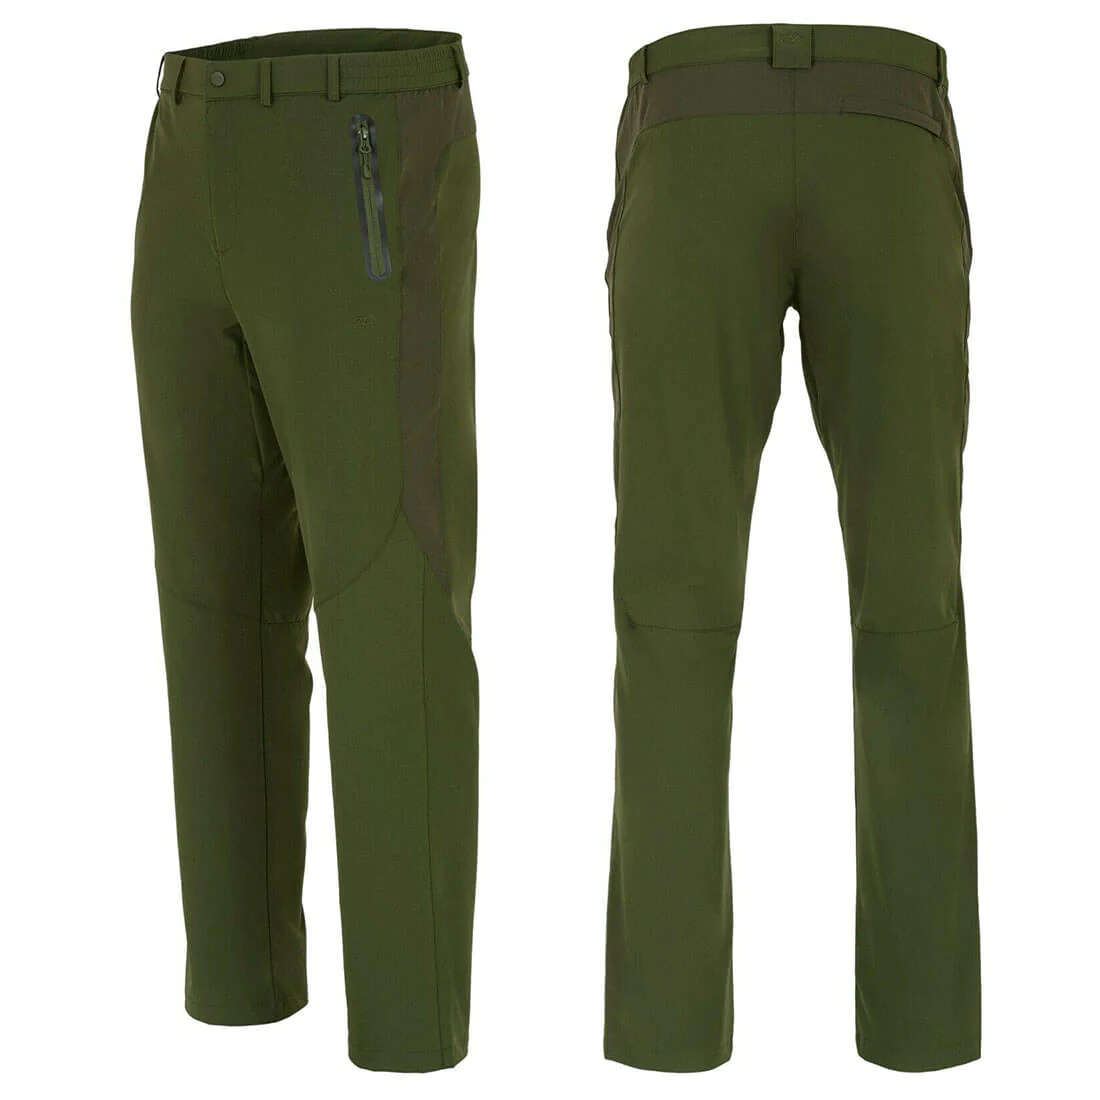 Highlander Ascent Munro Walking Trousers- Forest Green